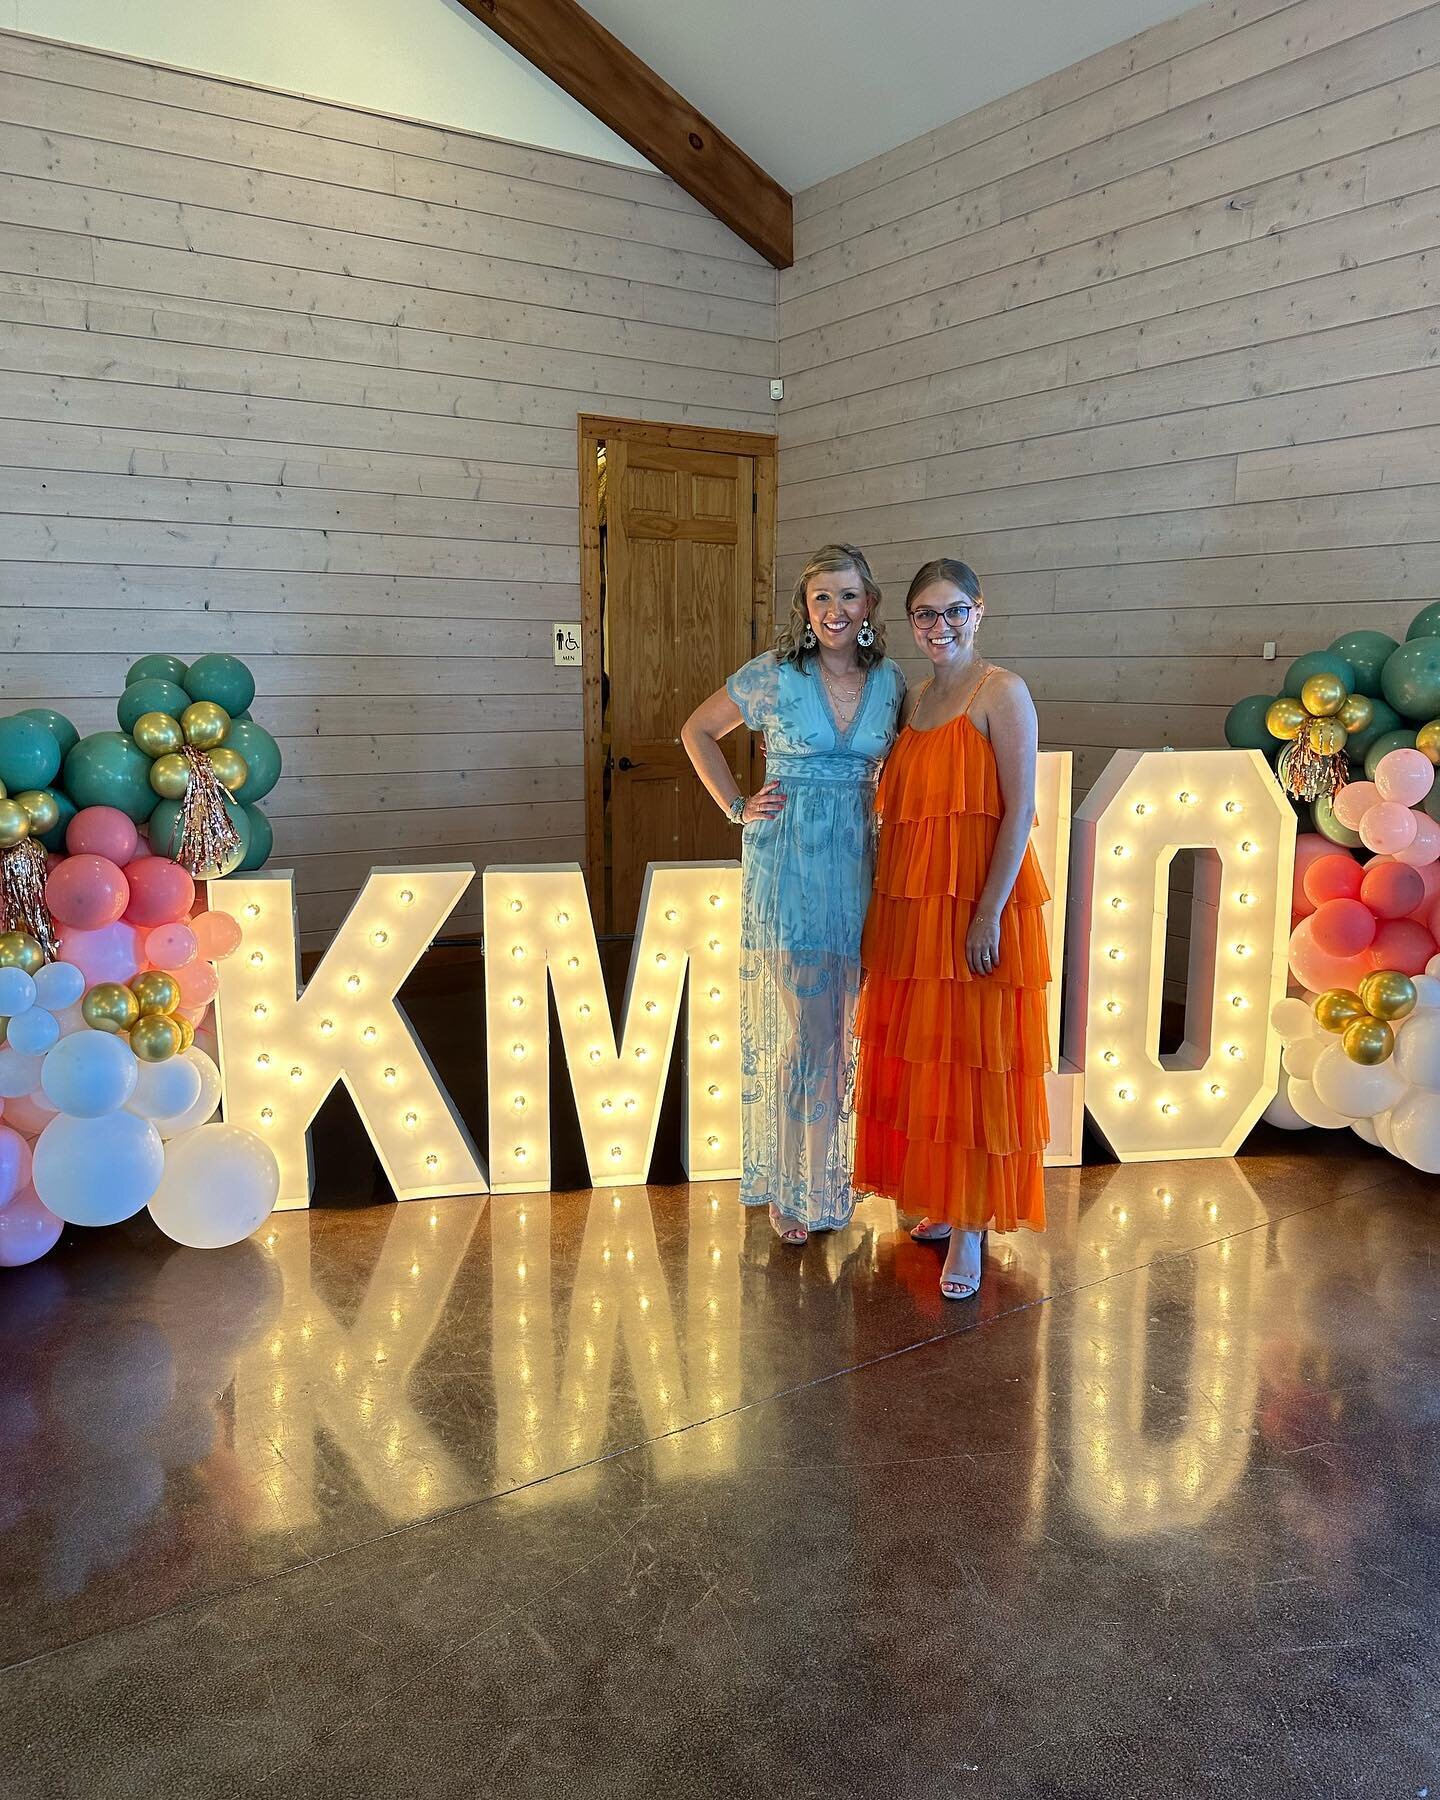 @knoxvillemoms is TEN! 🎉 We partied the night away at @reserveatbbh tonight to celebrate 💃 

I&rsquo;m so grateful to know all of the truly wonderful ladies that make up this team. Moving here 5 years ago was one of the hardest things I&rsquo;ve ev